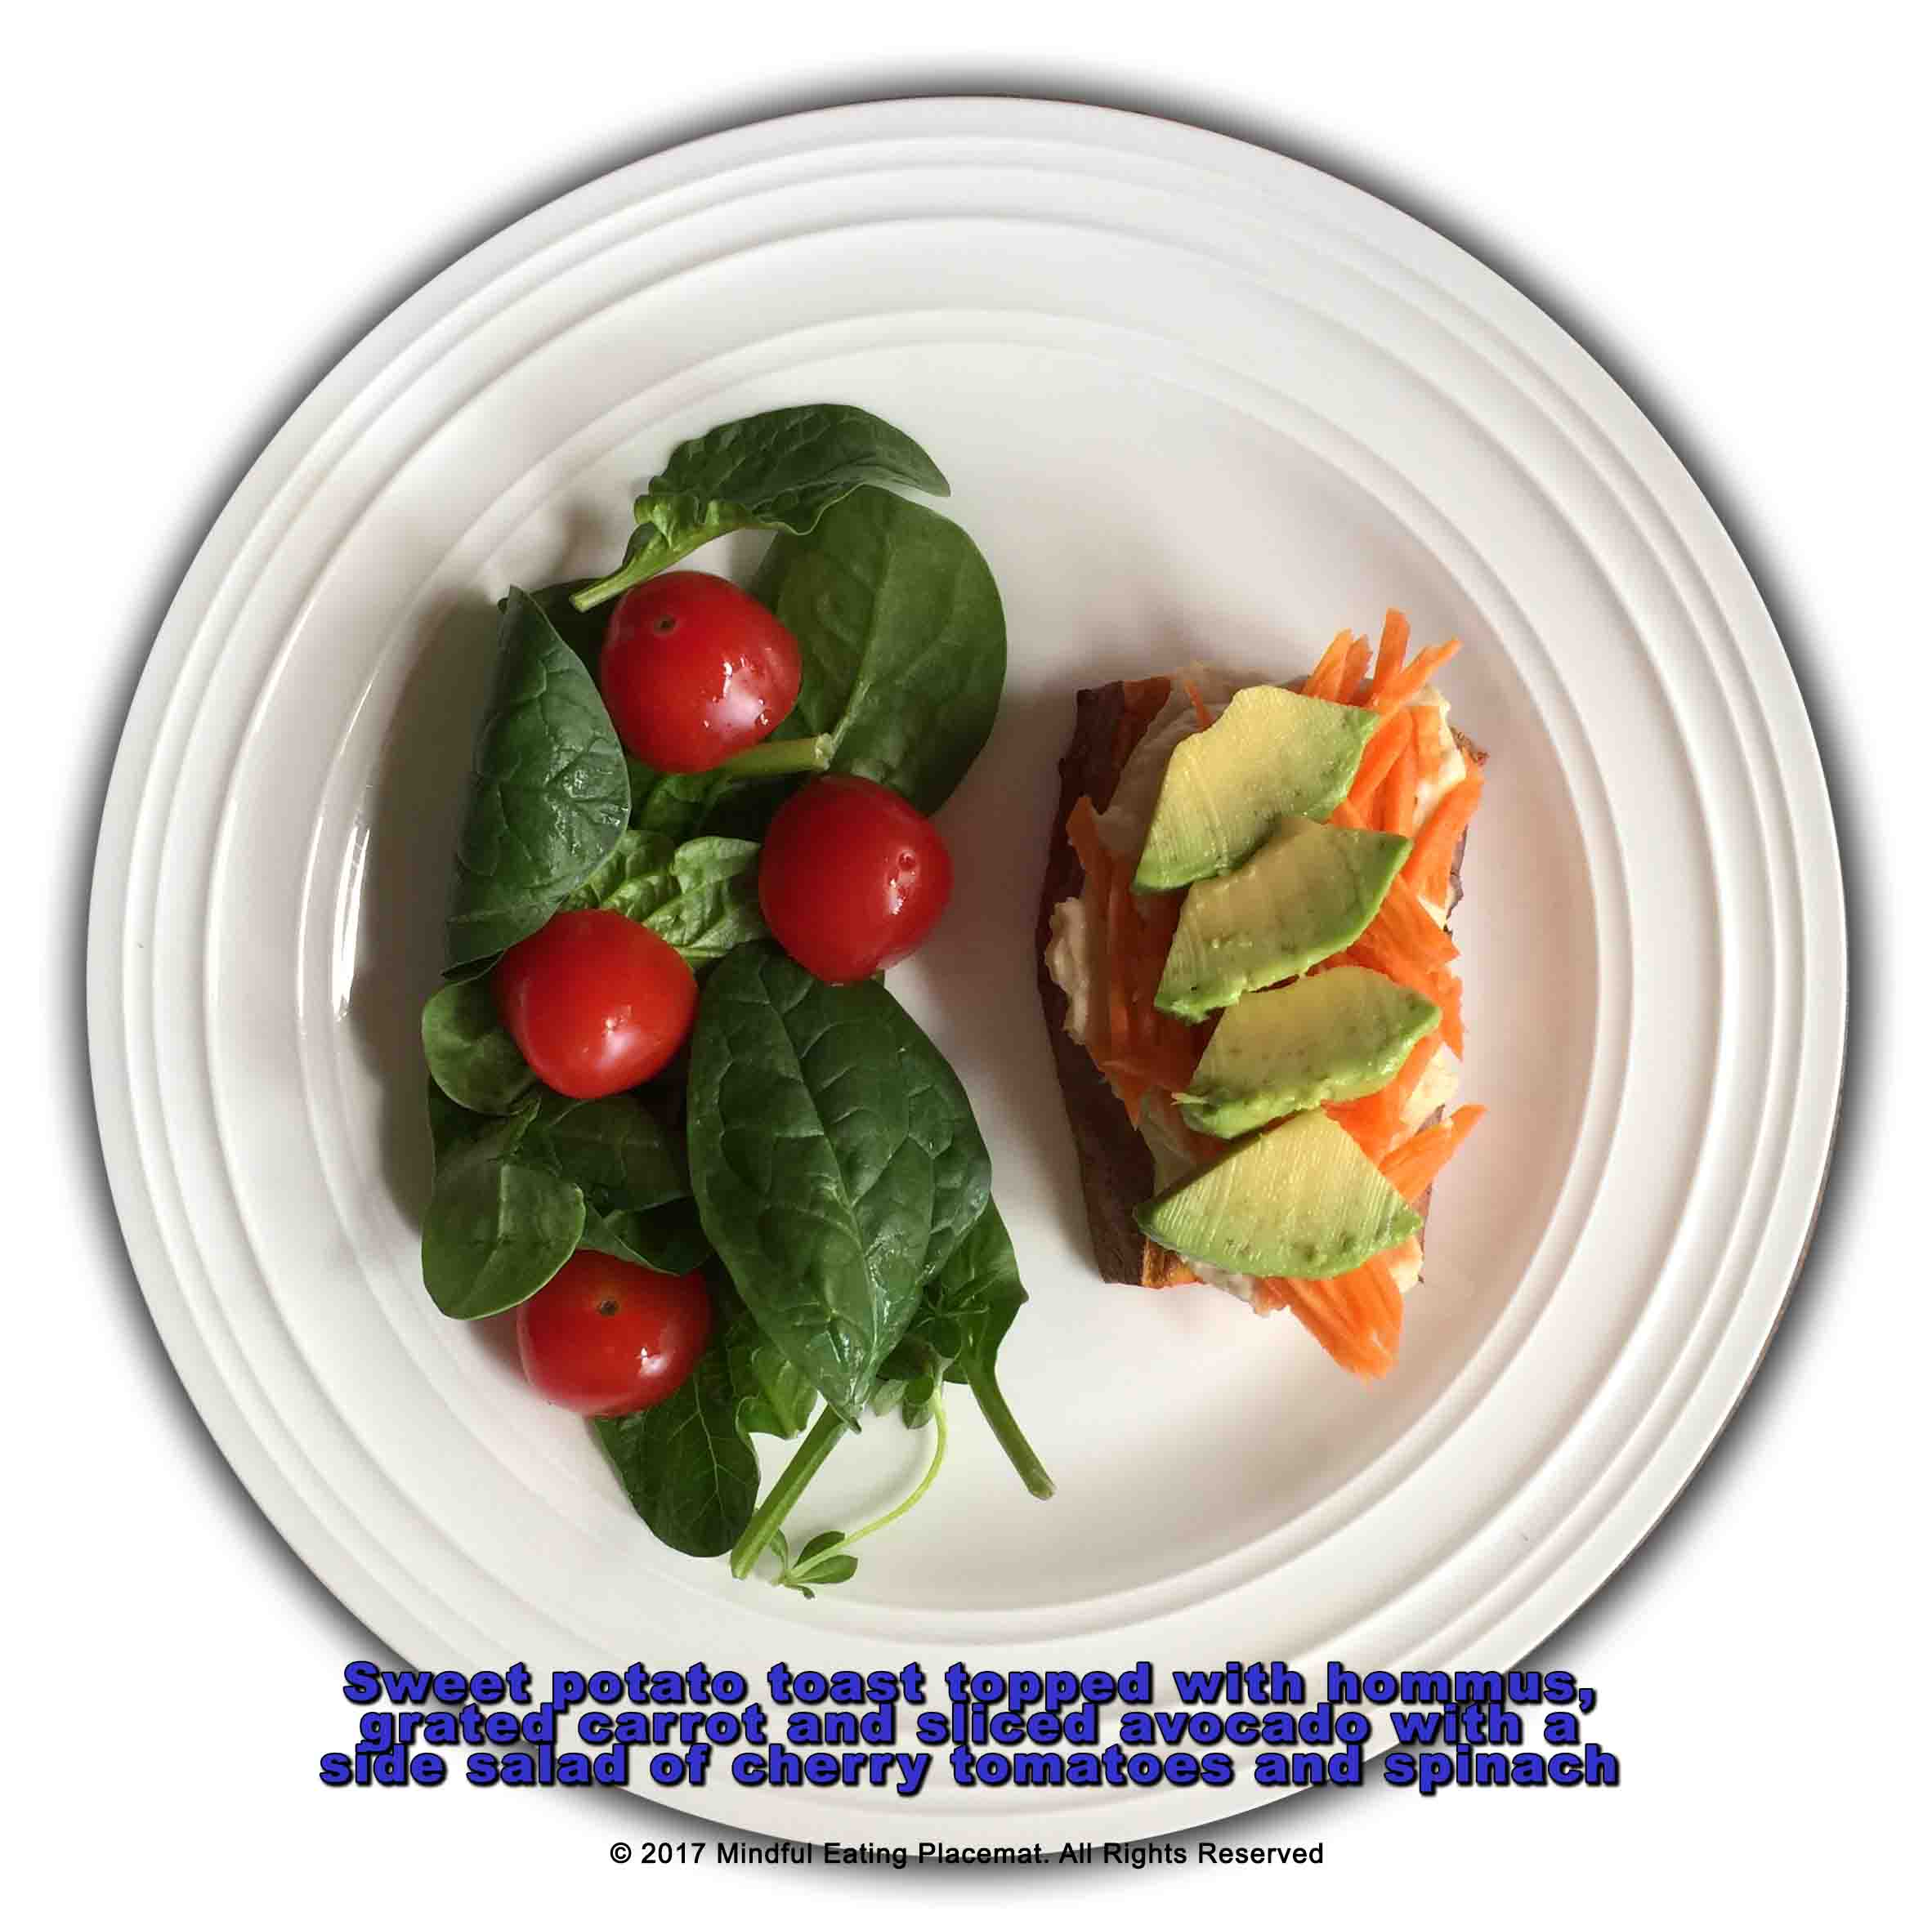 Sweet potato toast topped with hommus, carrot and avocado with a side salad of spinach and cherry tomatoes 